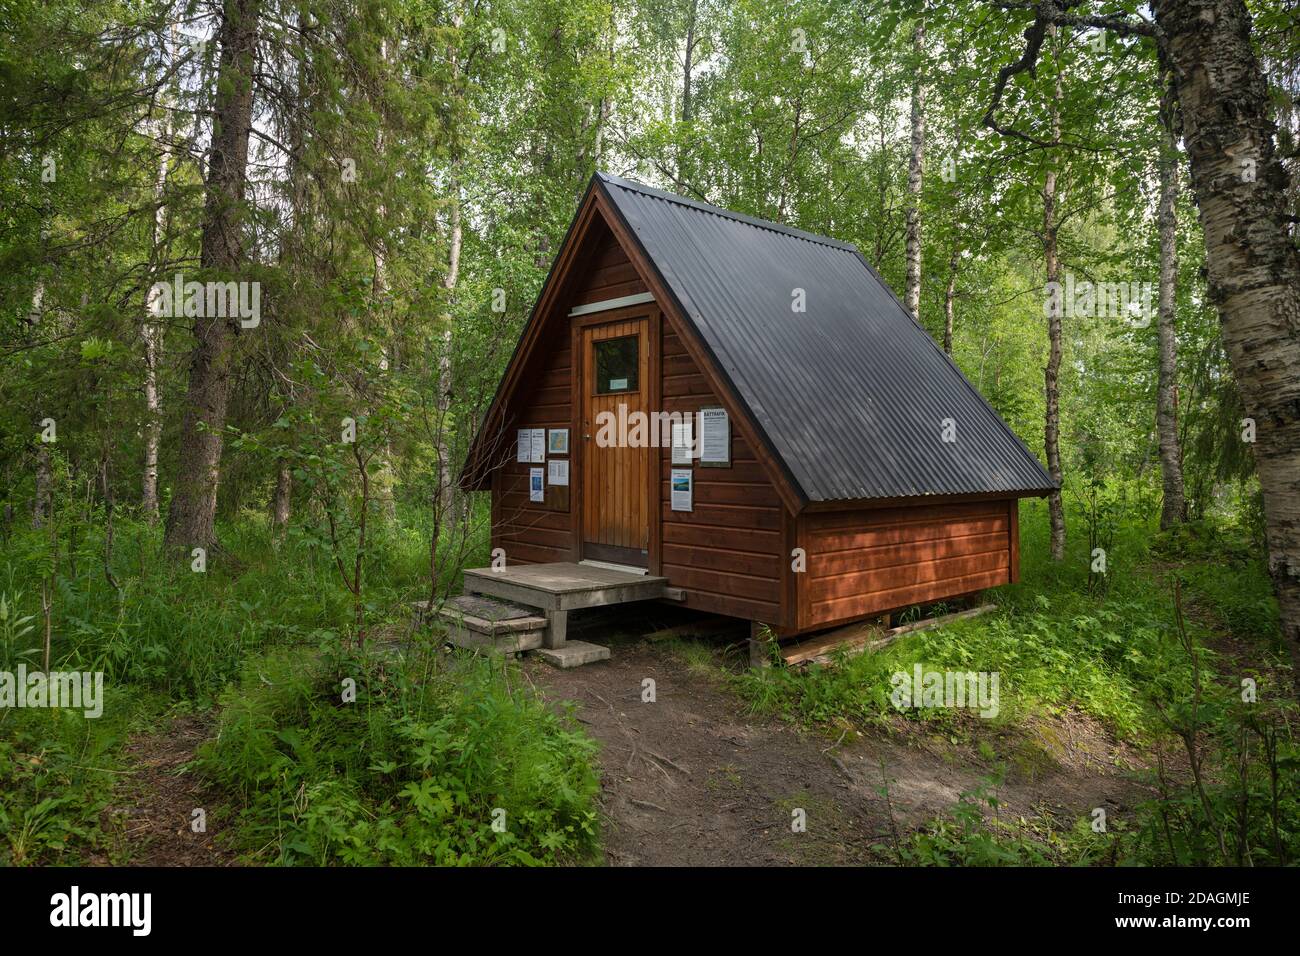 Small shelter in forest at southern trailhead of Padjelantaleden trail, Lapland, Sweden Stock Photo